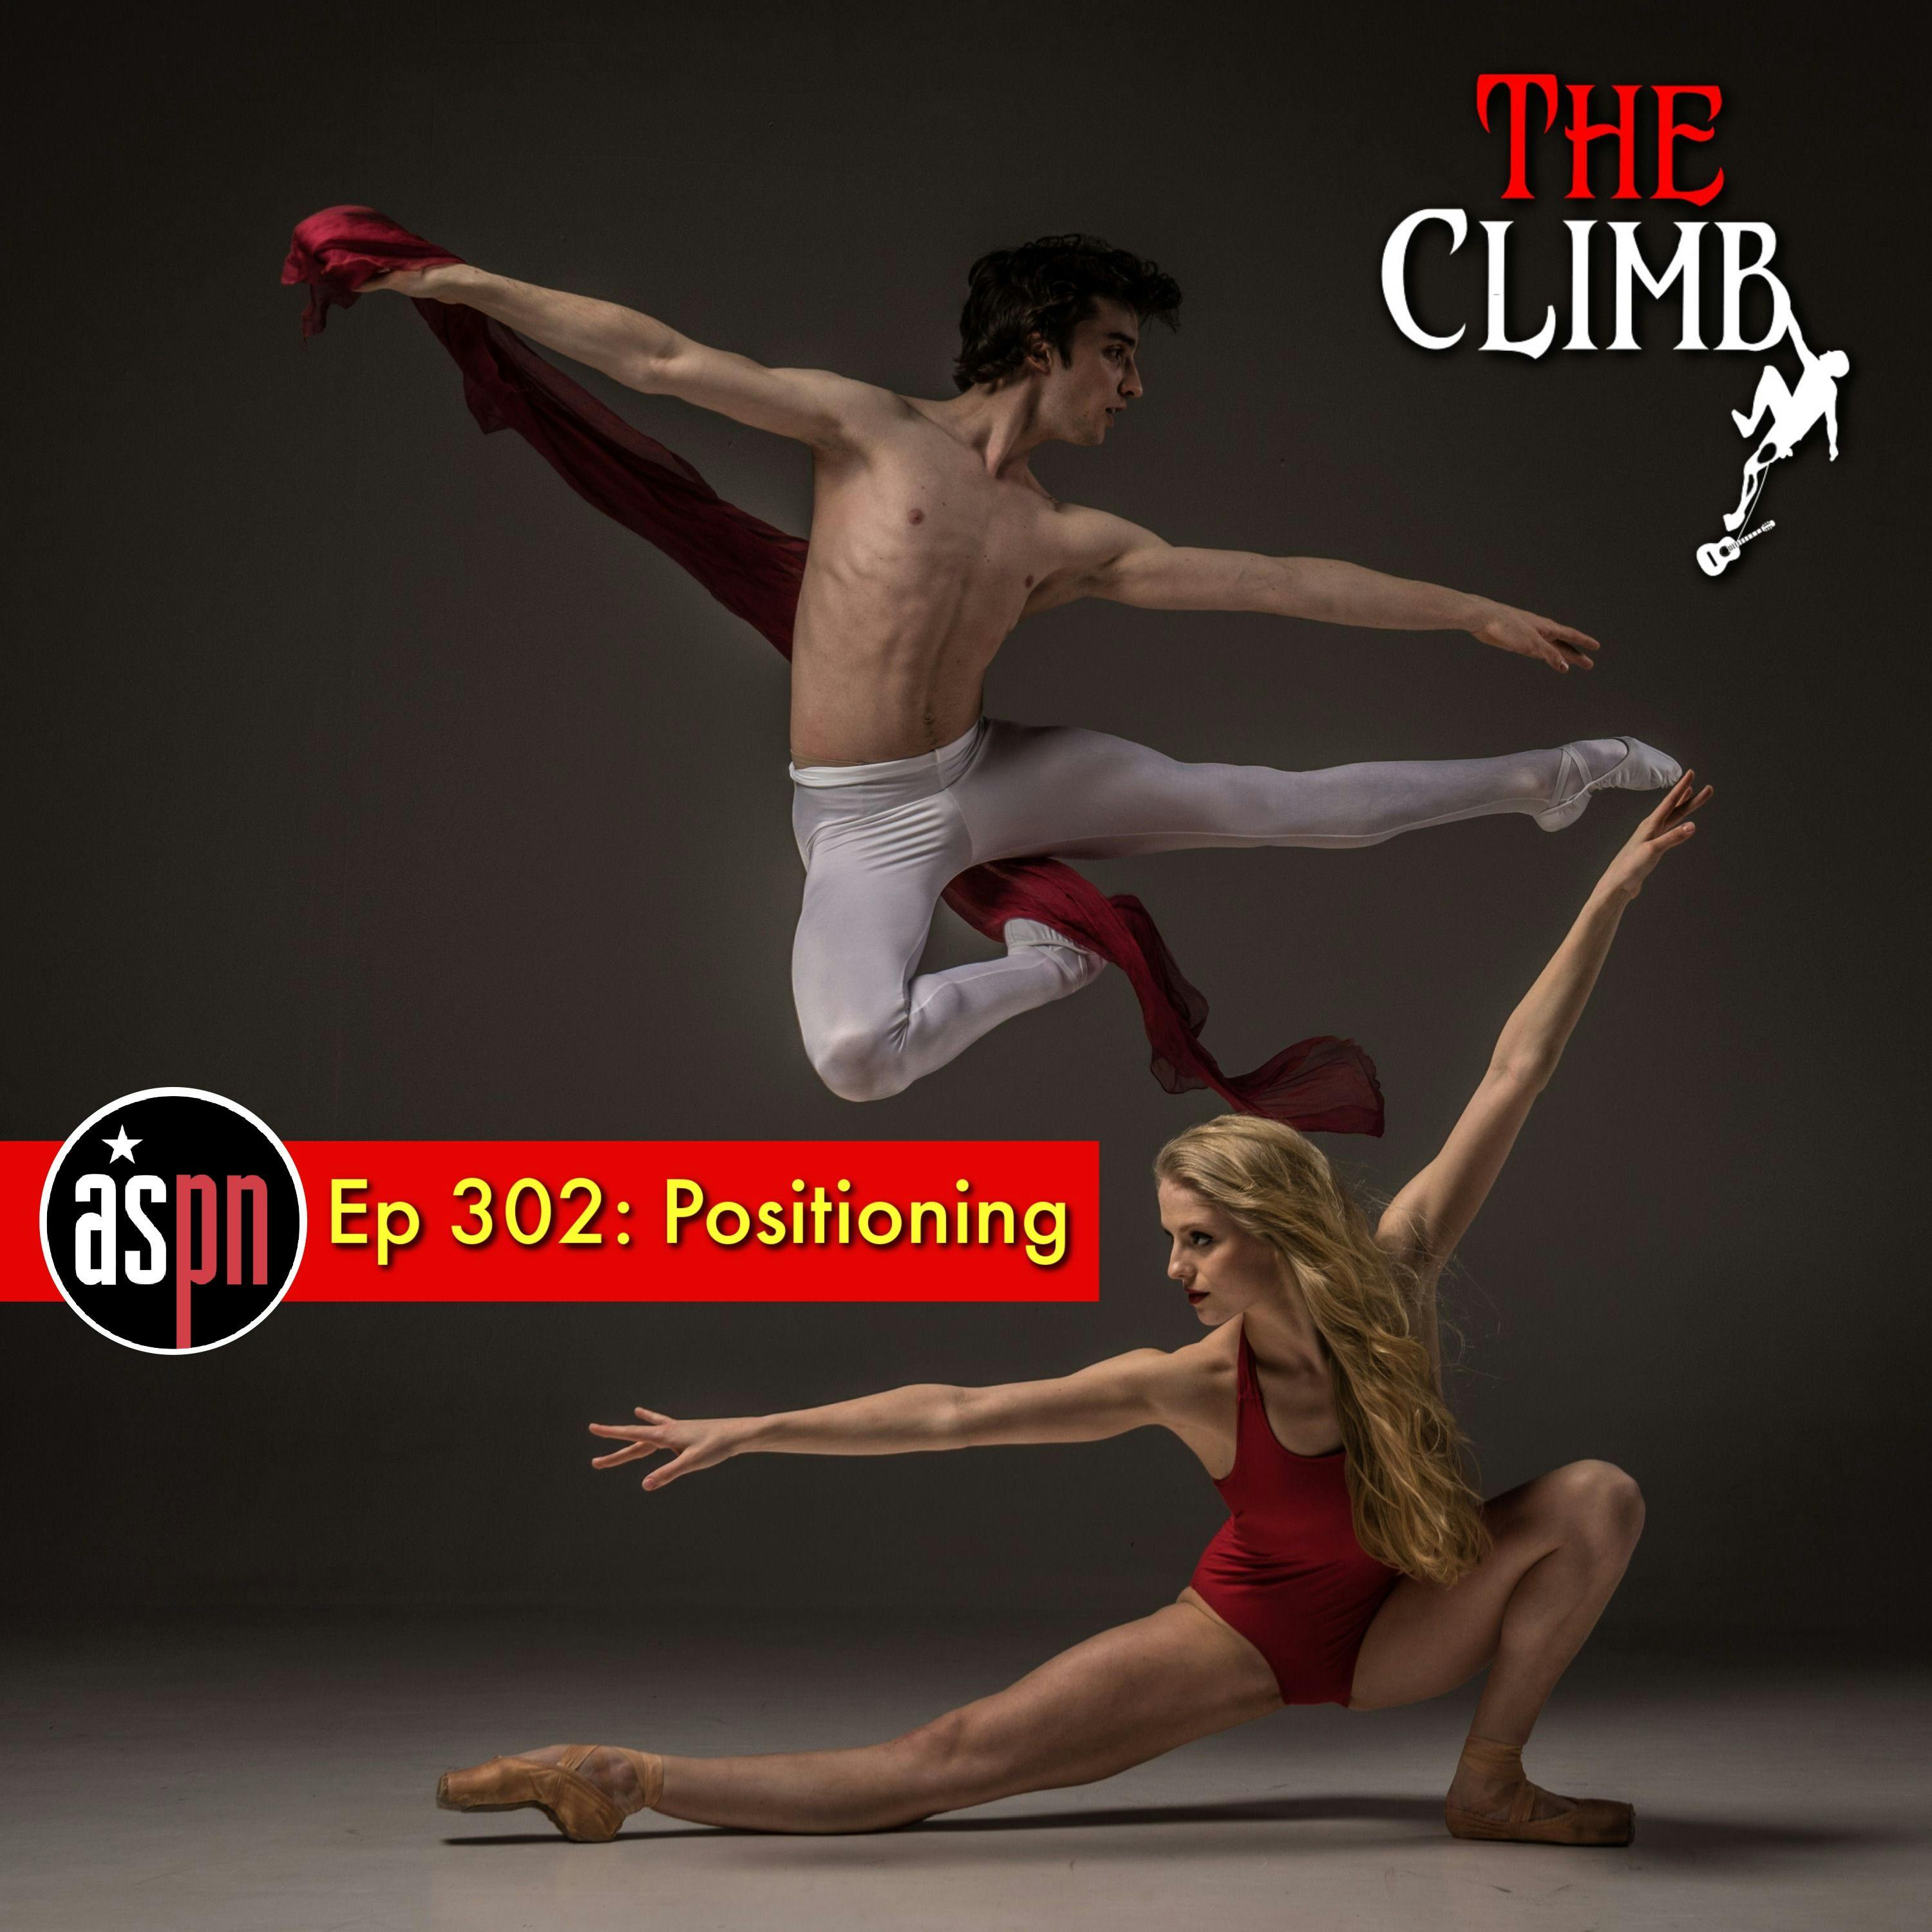 Ep 302: Positioning